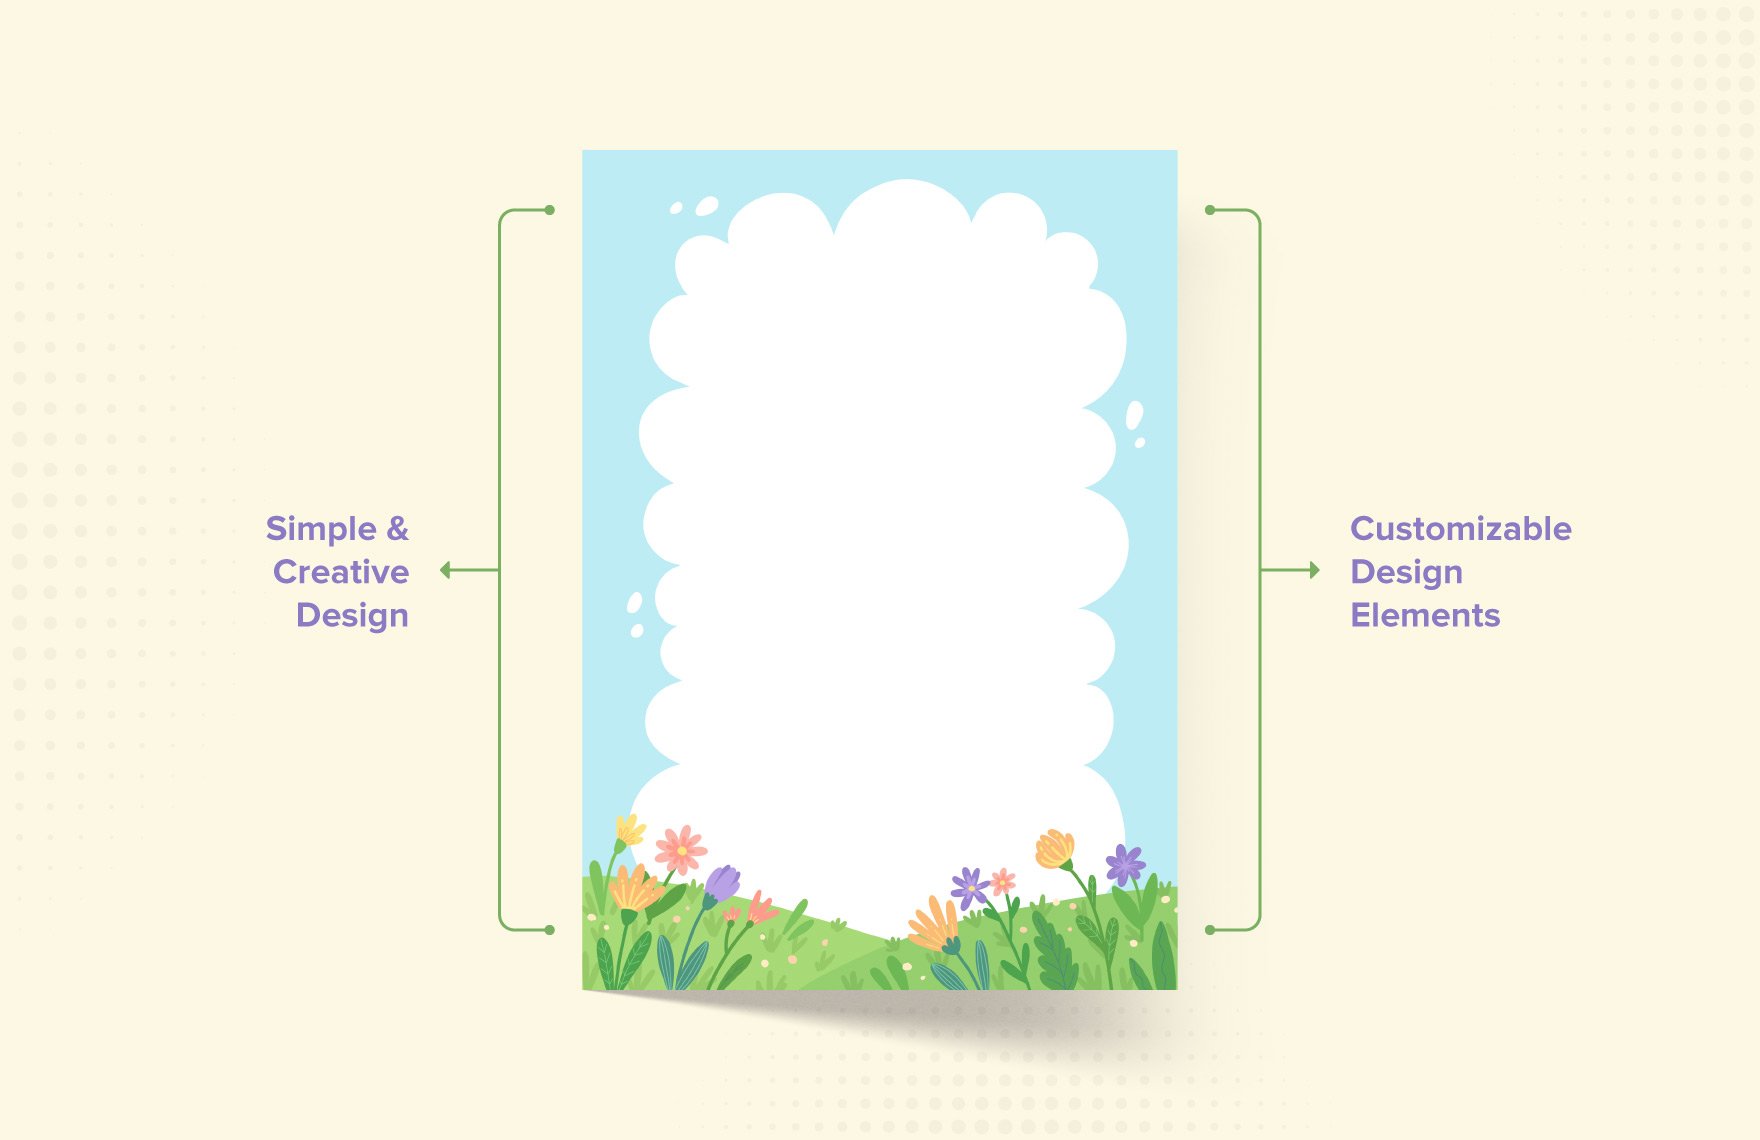 Spring Page Border Template